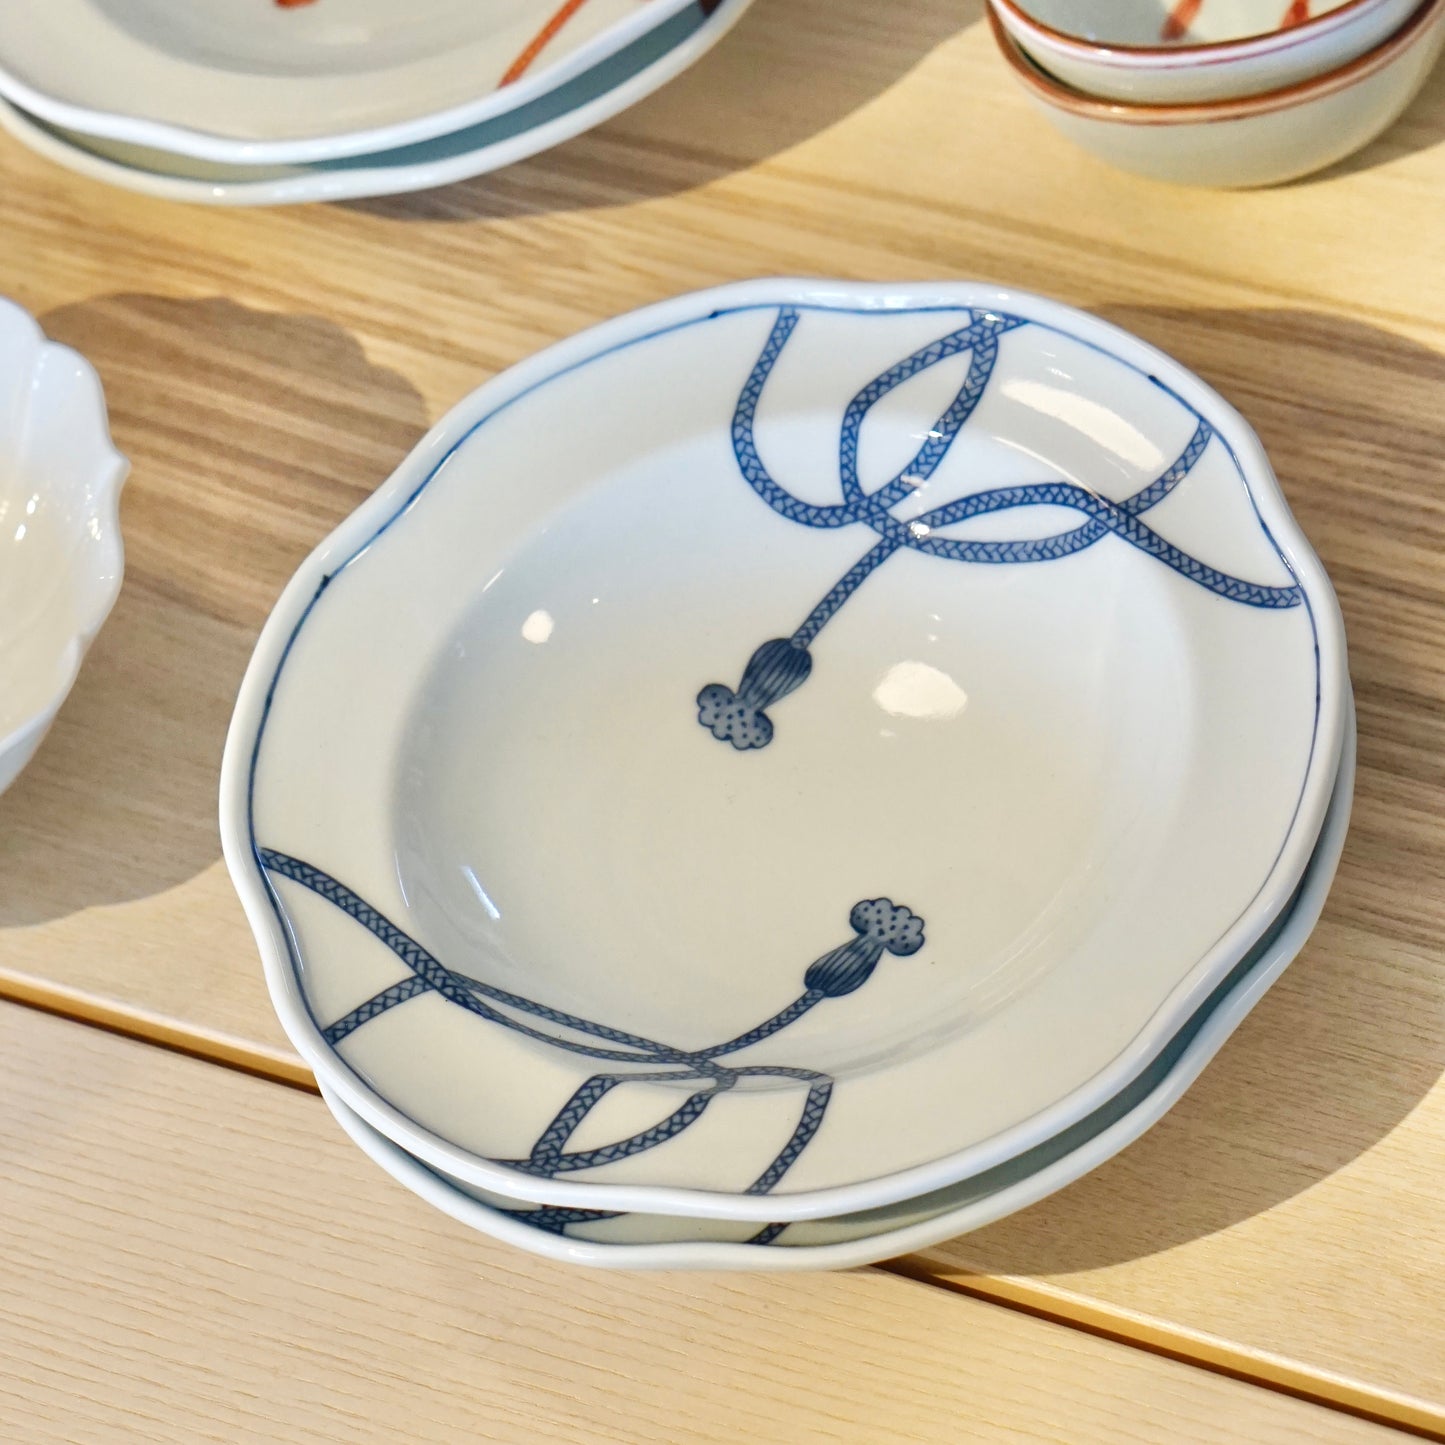 Hasami ware - flower shaped plate with lucky knot